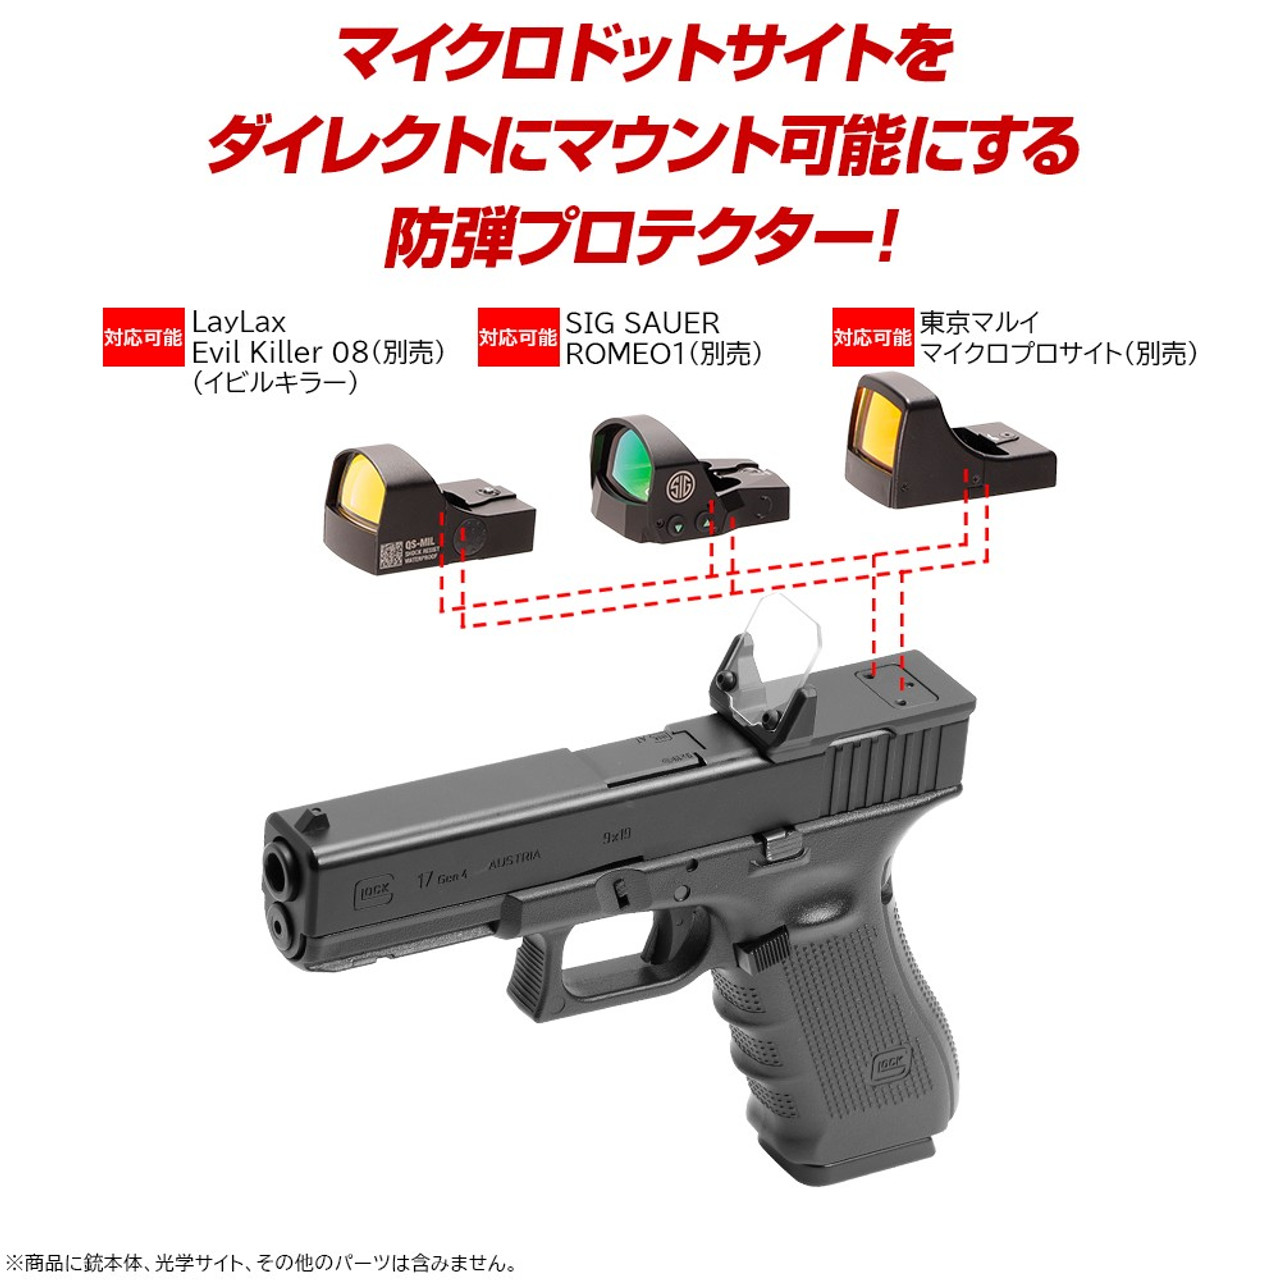 EMG / SAI Slide Kits for Elite Force GLOCK Series Gas Blowback Airsoft  Pistols by G&P (Model: Tier One w/ Red Dot Sight / Black / GLOCK 17 Gen.4)